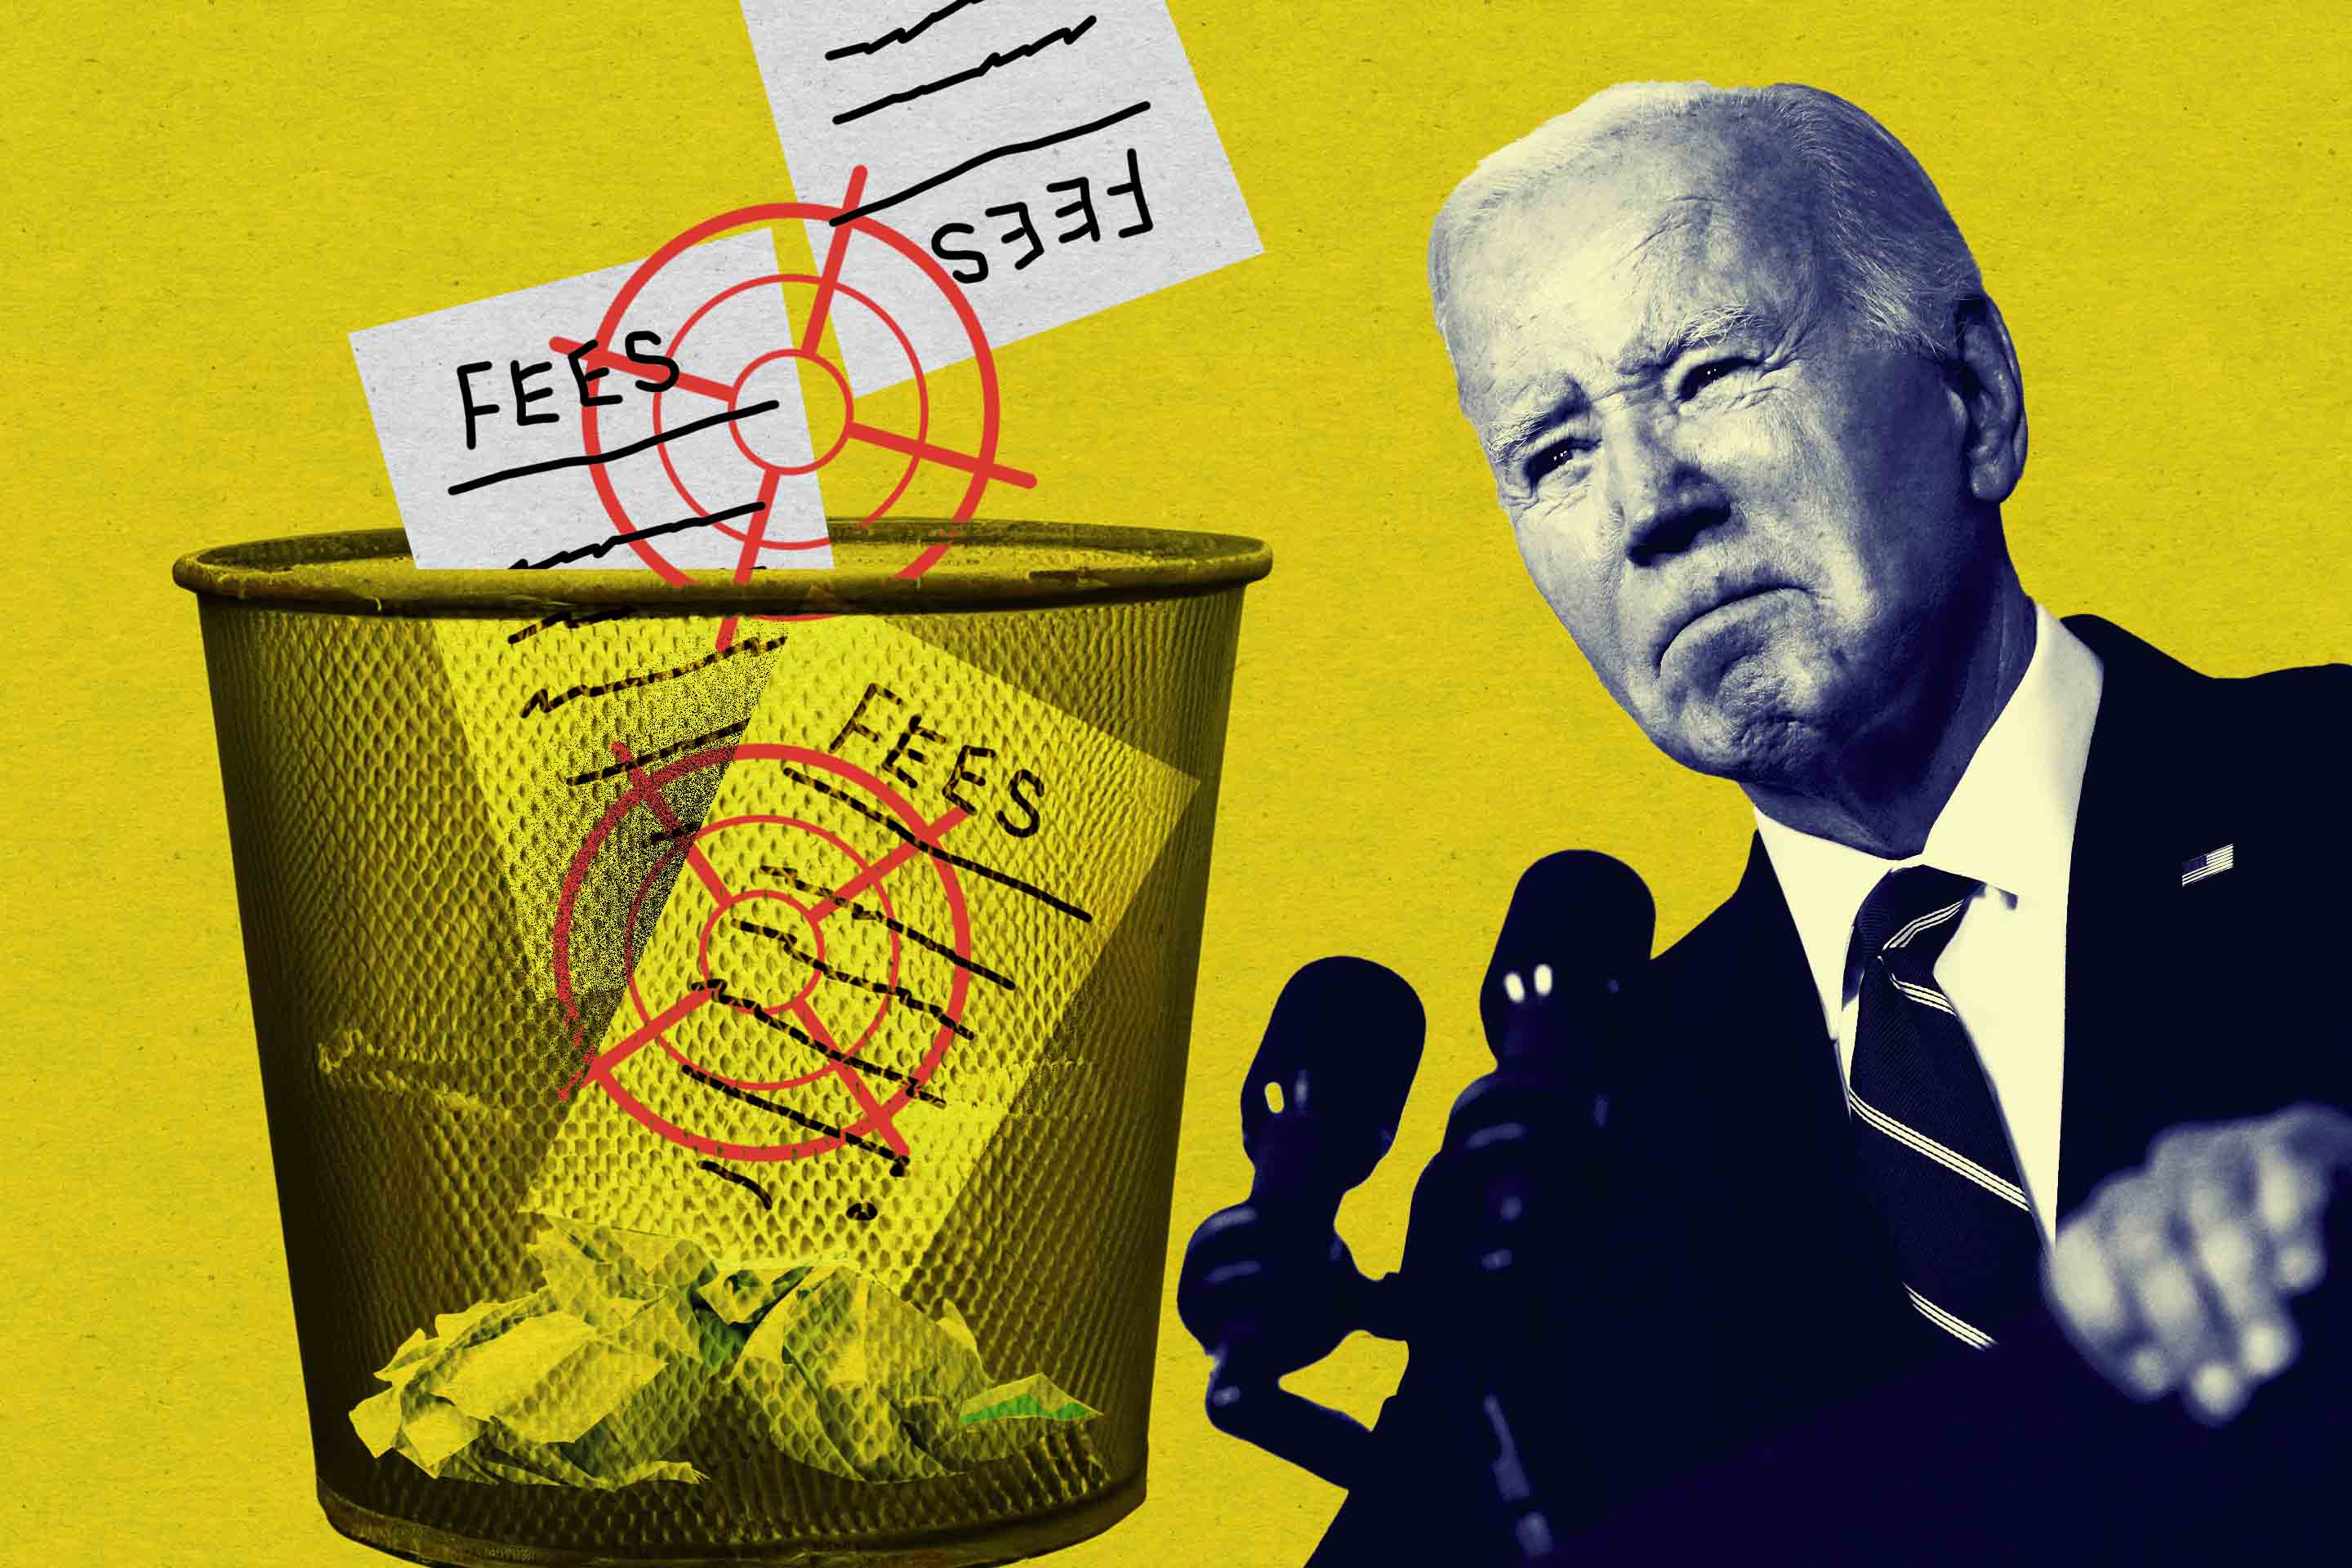 Biden Moves to Ban 'Junk Fees' Charged by Banks, Hotels, Ticket Sellers and More